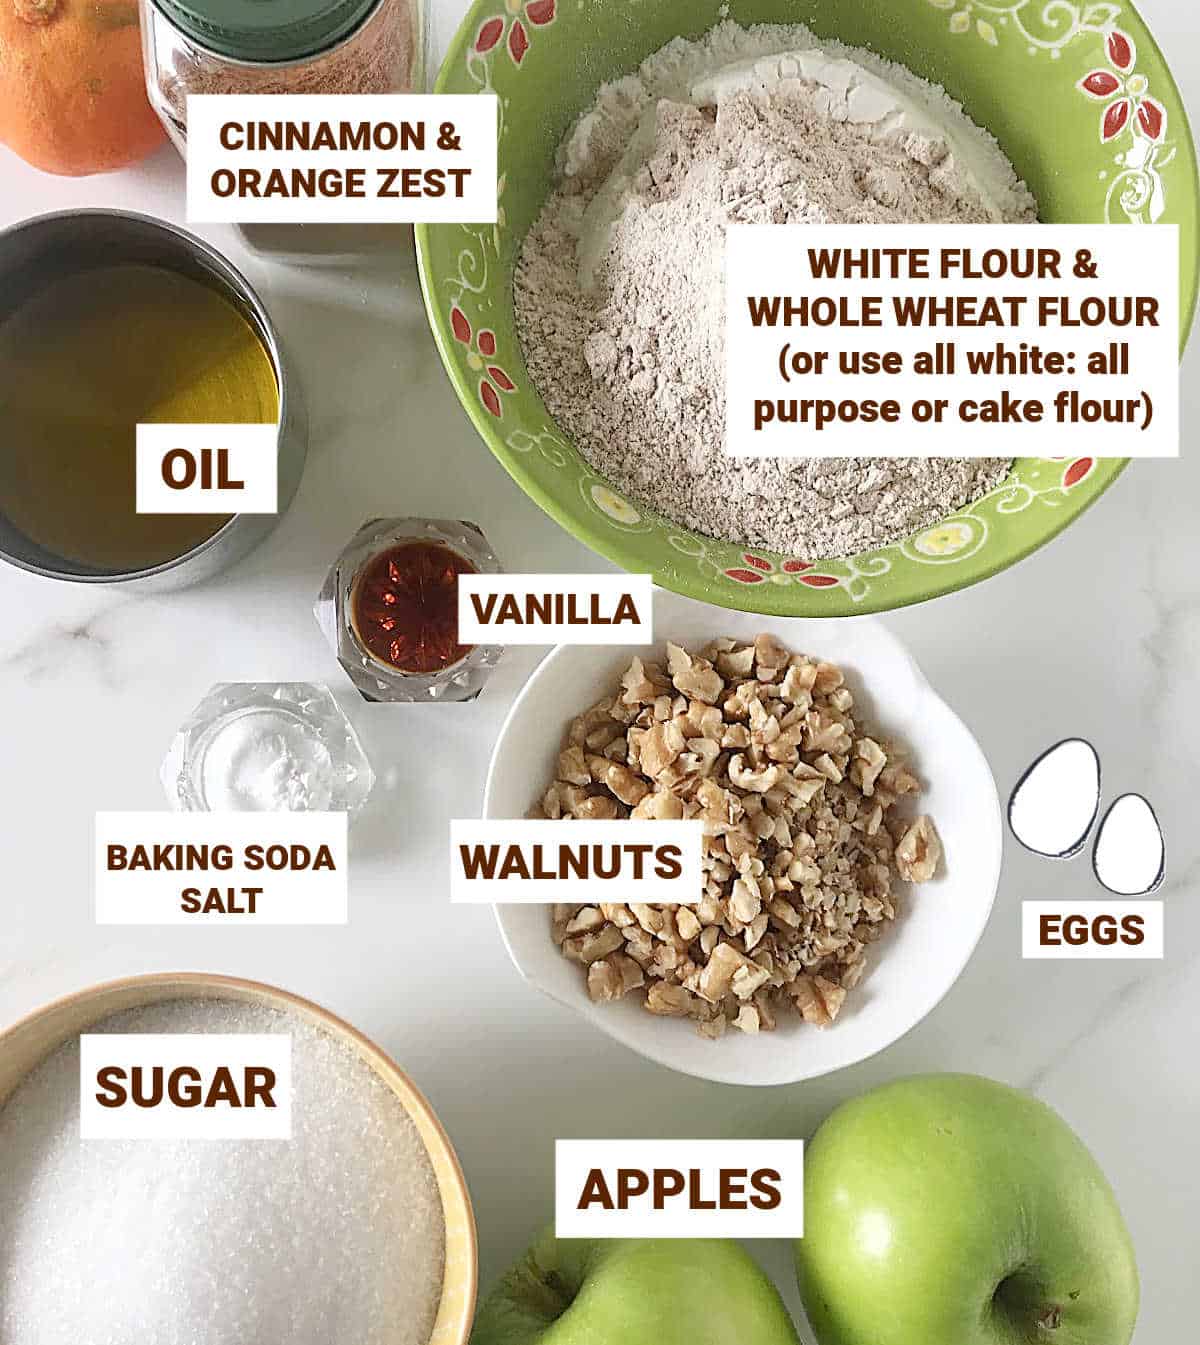 Apple walnut cake ingredients in bowls on white surface, including flours, sugar, oil, eggs, vanilla, cinnamon